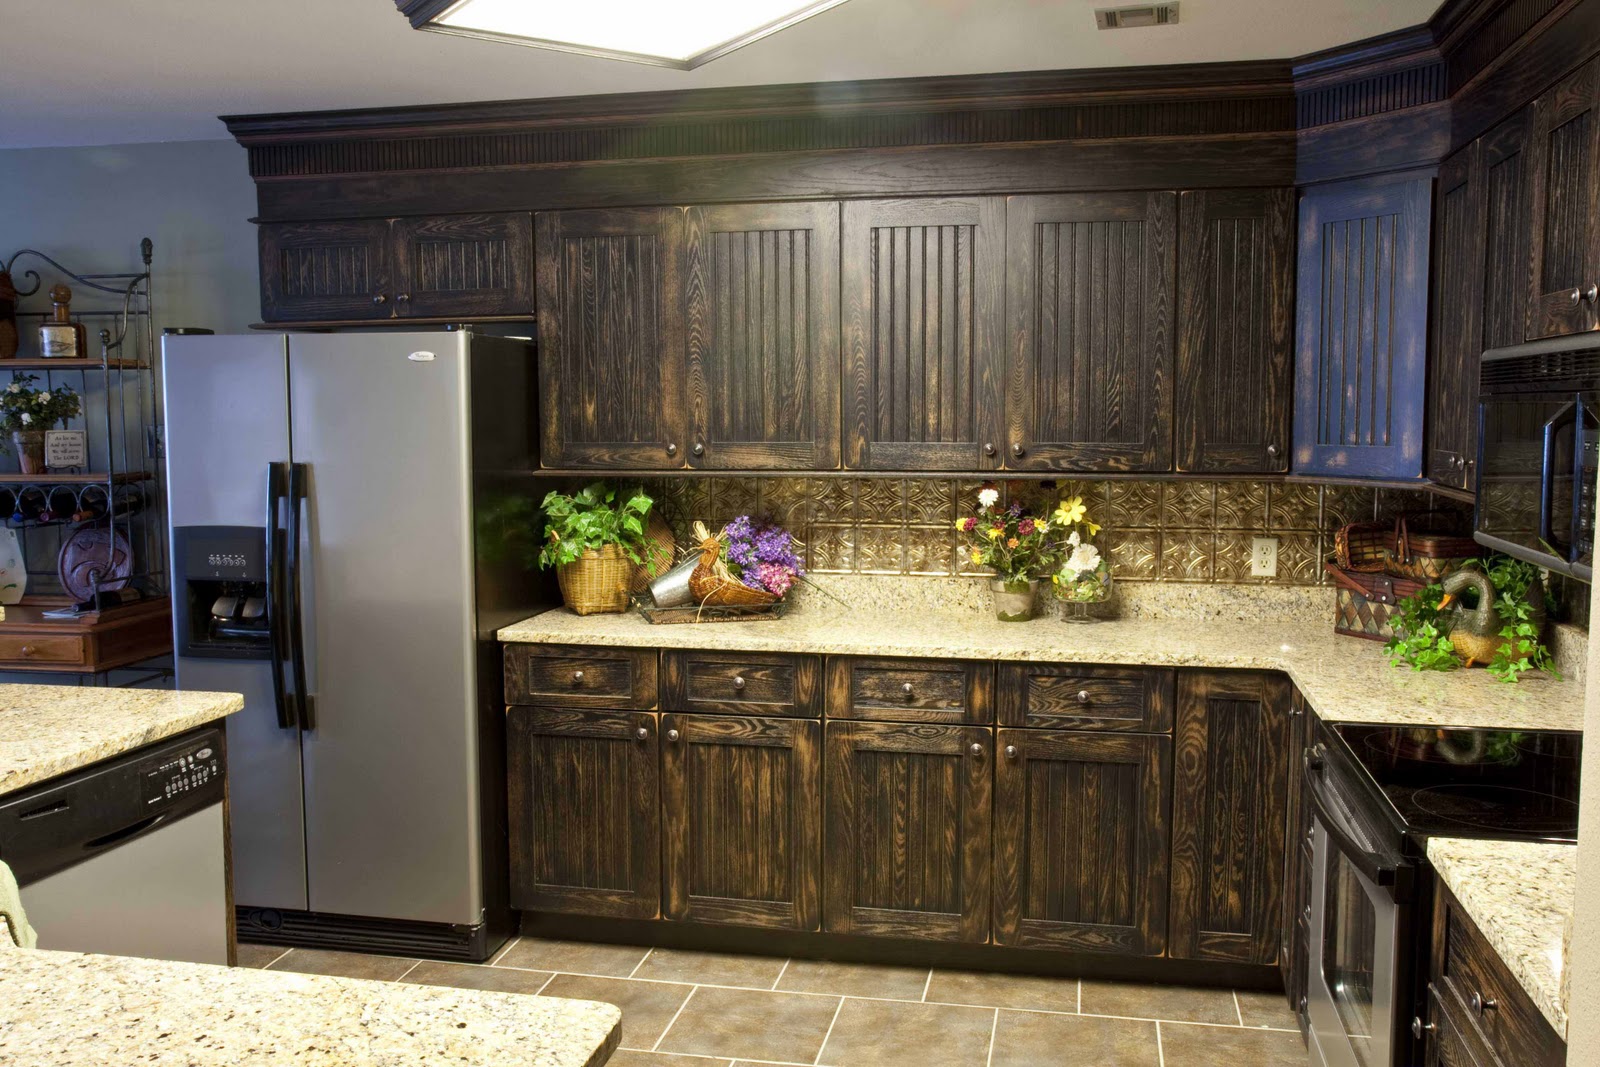 Kitchen Cabinet Made Rustic Kitchen Cabinet Refacing Design Made From Wooden Material Combined With Cream Marble Countertop And Concrete Tile Flooring Kitchen Kitchen Cabinet Refacing For Totally Different Look